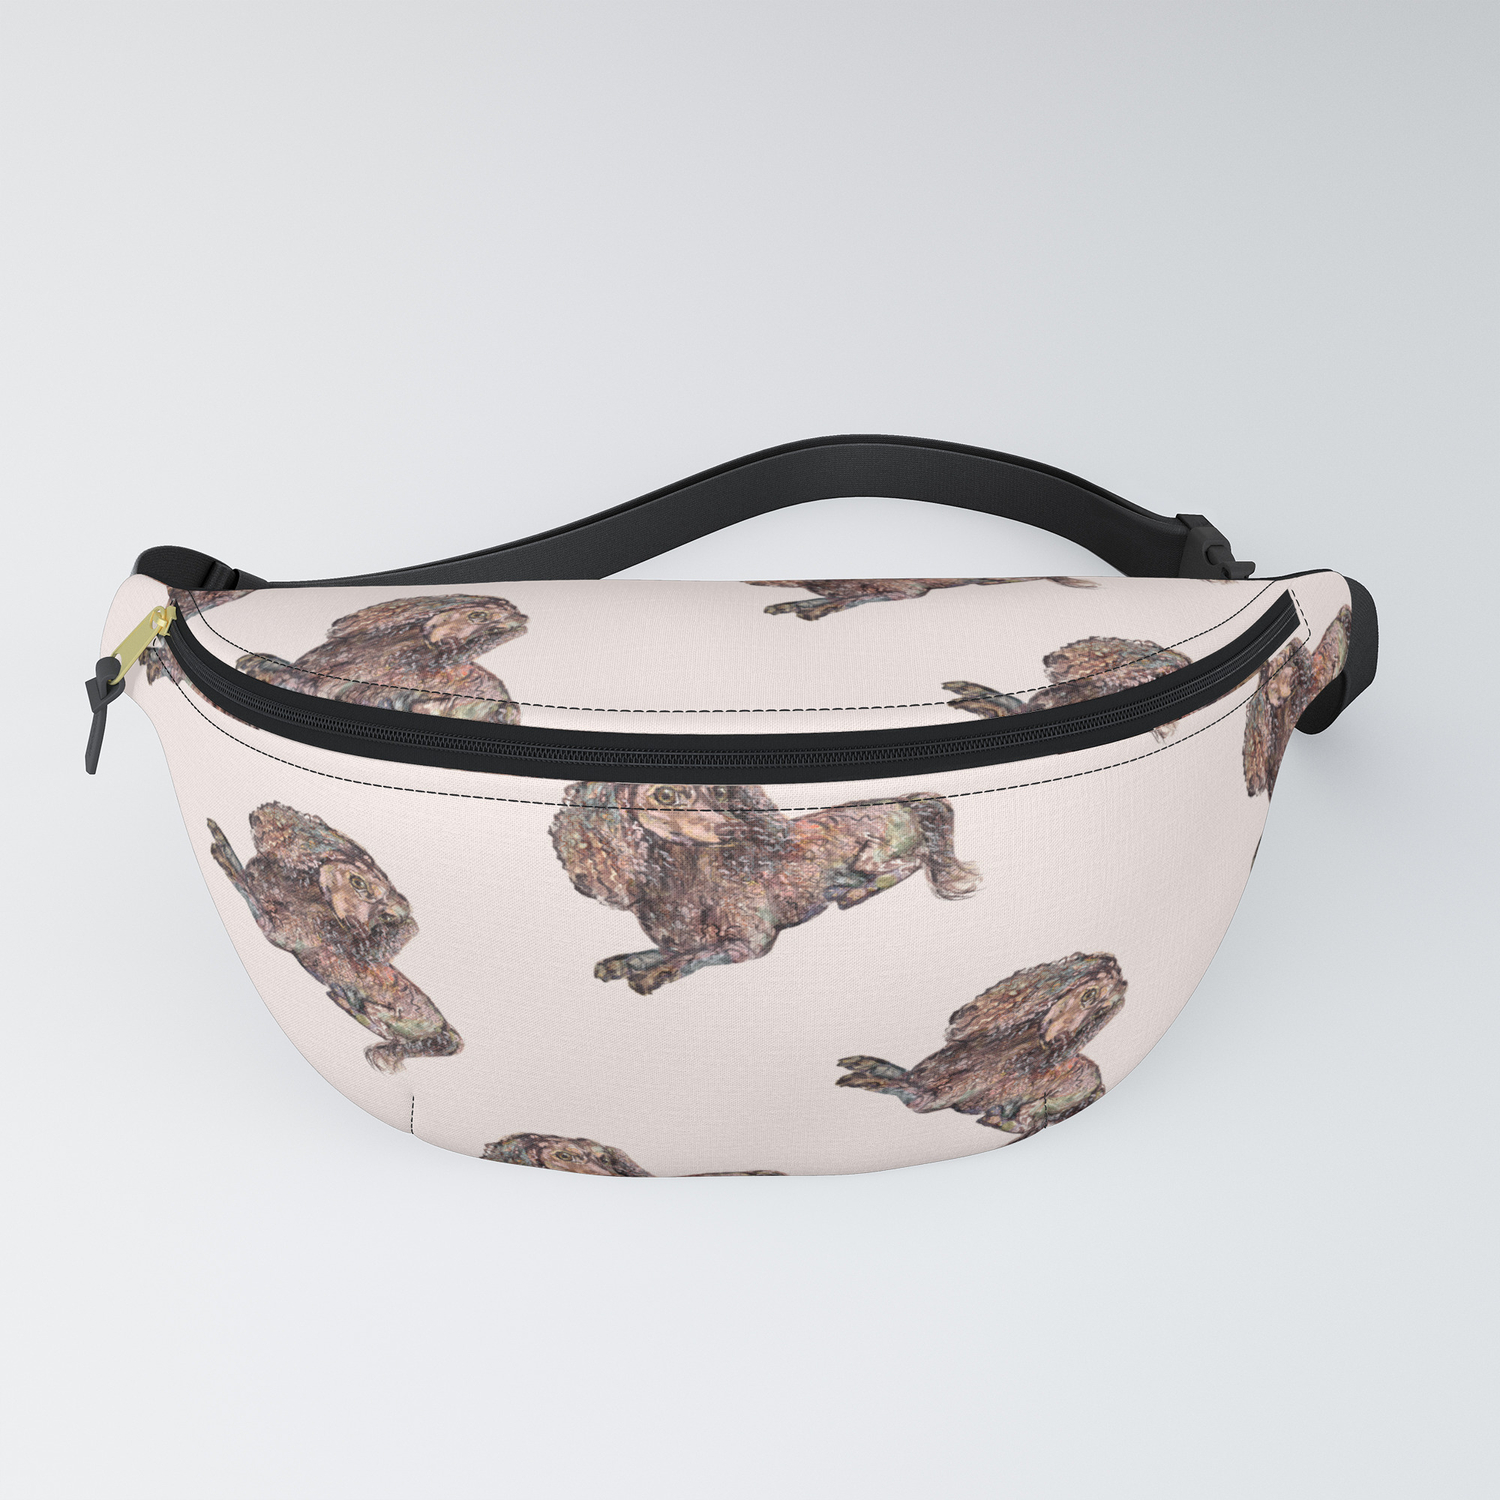 girly fanny pack